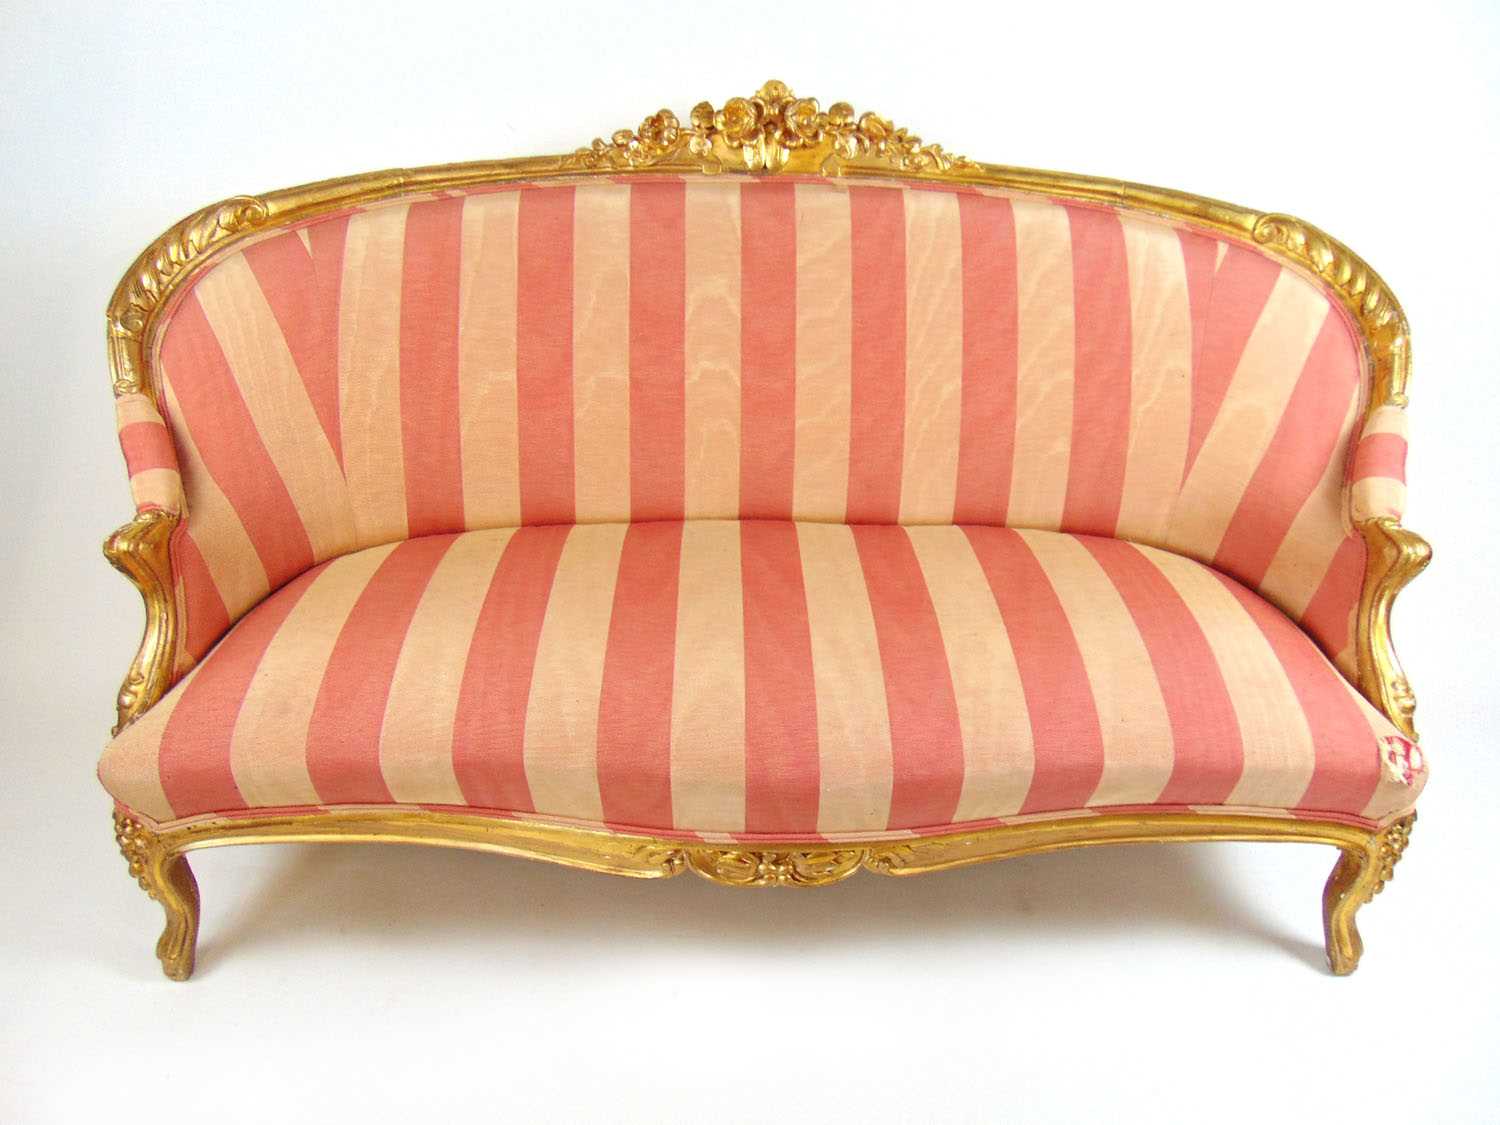 A 19th century carved giltwood settee upholstered in a striped pink fabric, the floral top rail - Image 2 of 2